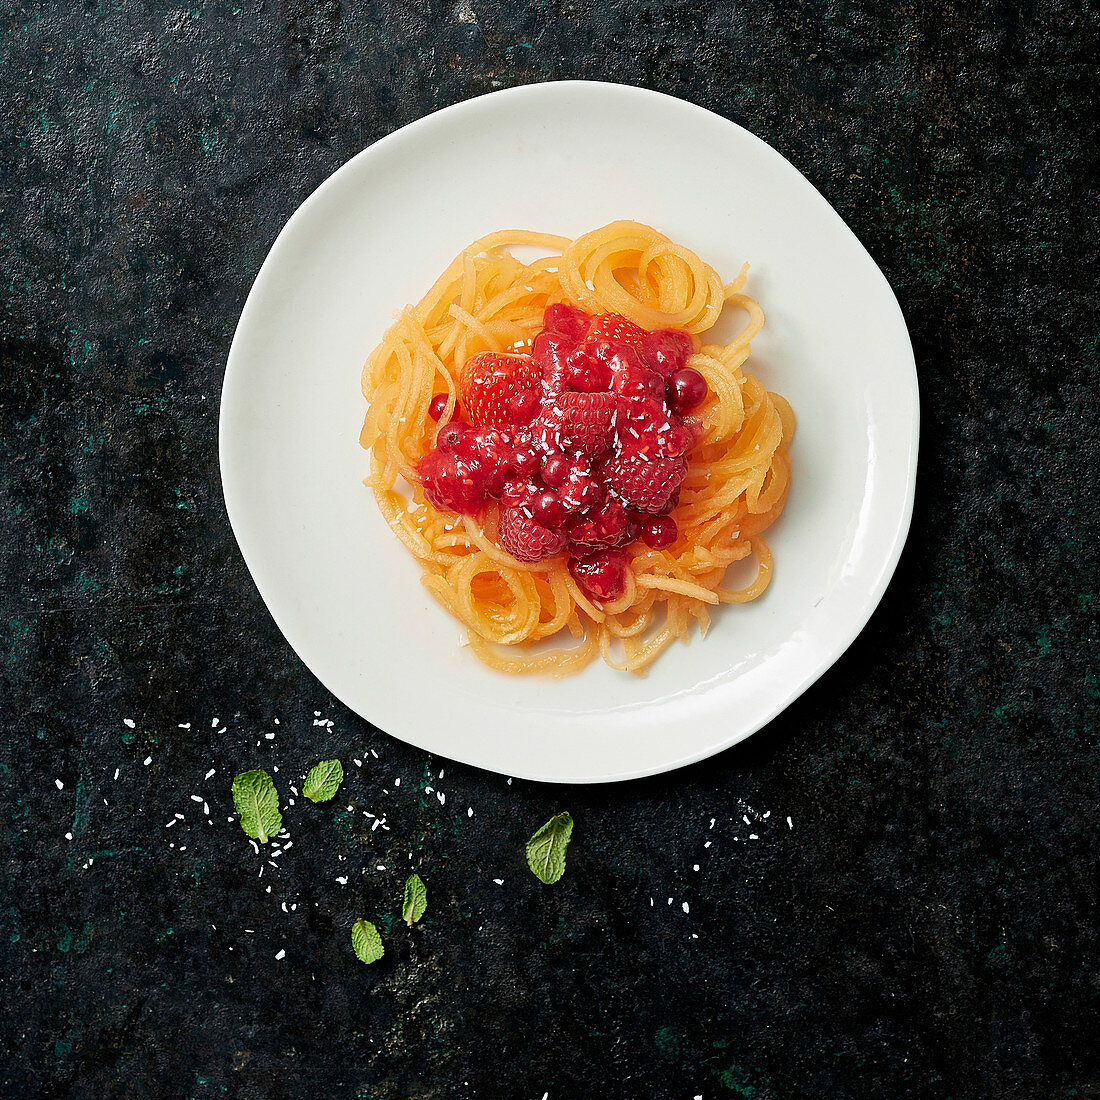 Melon spaghetti with red fruits